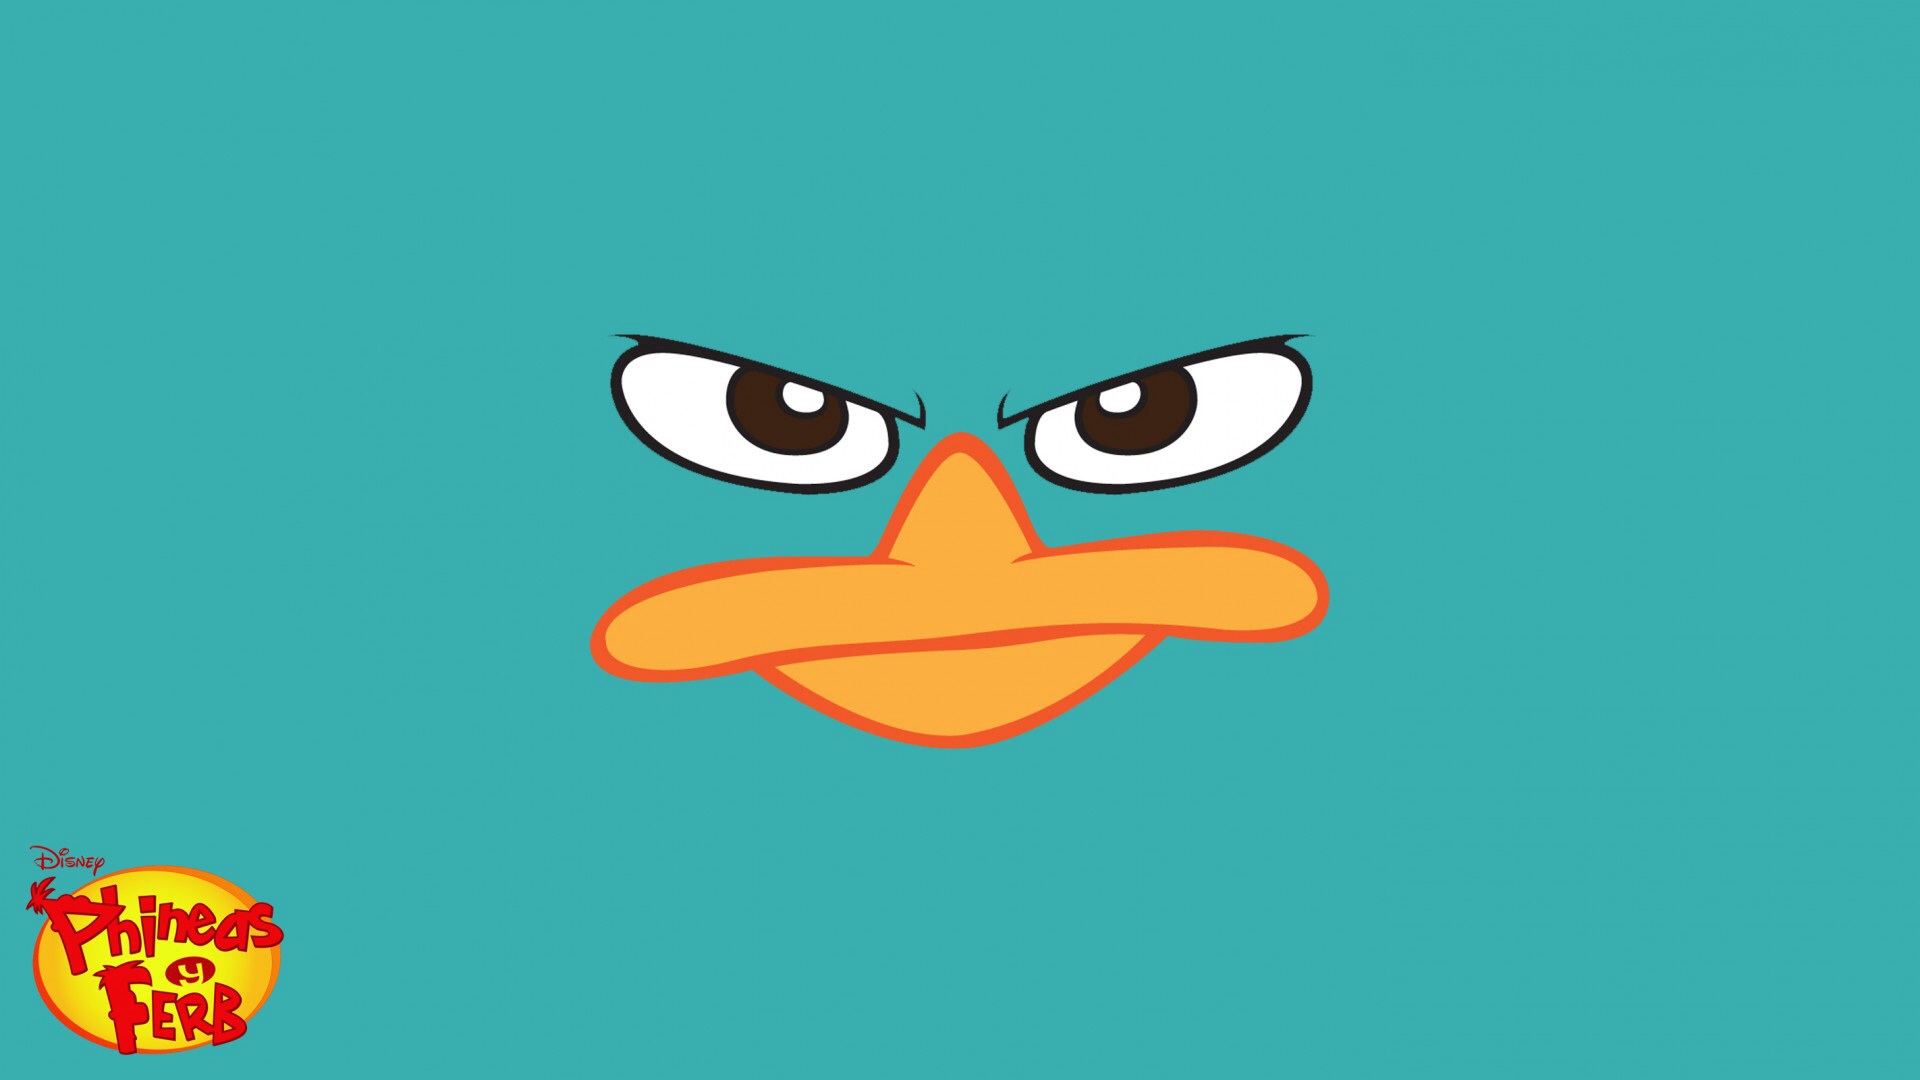 Perry - Phineas and Ferb Wallpaper (37194756) - Fanpop